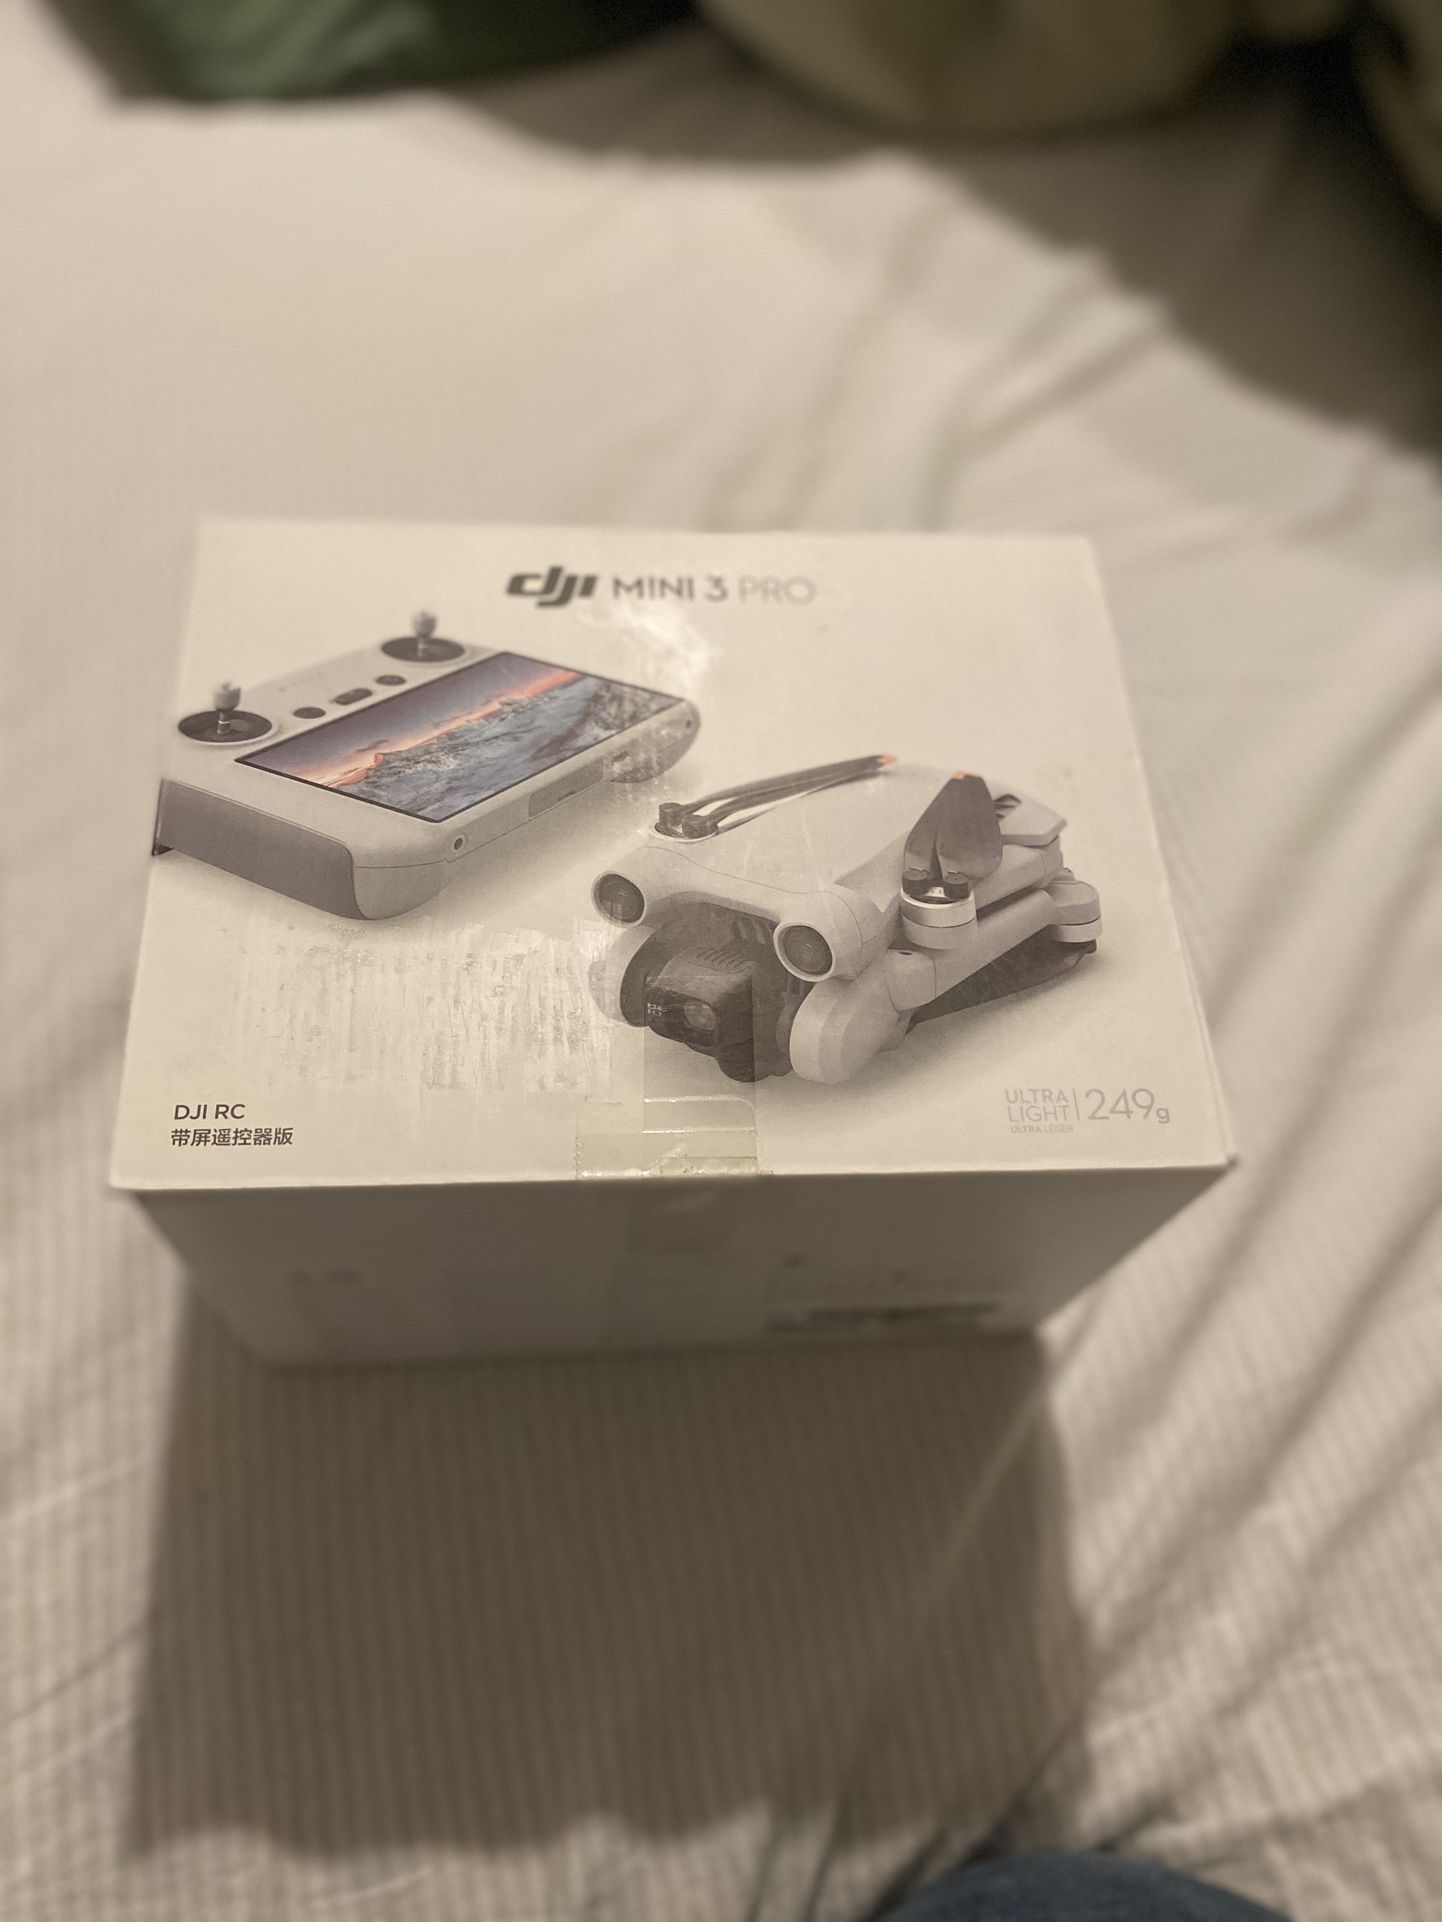  New (Open Box) DJI Mini 3 Pro with Smart RC And 1 Battery